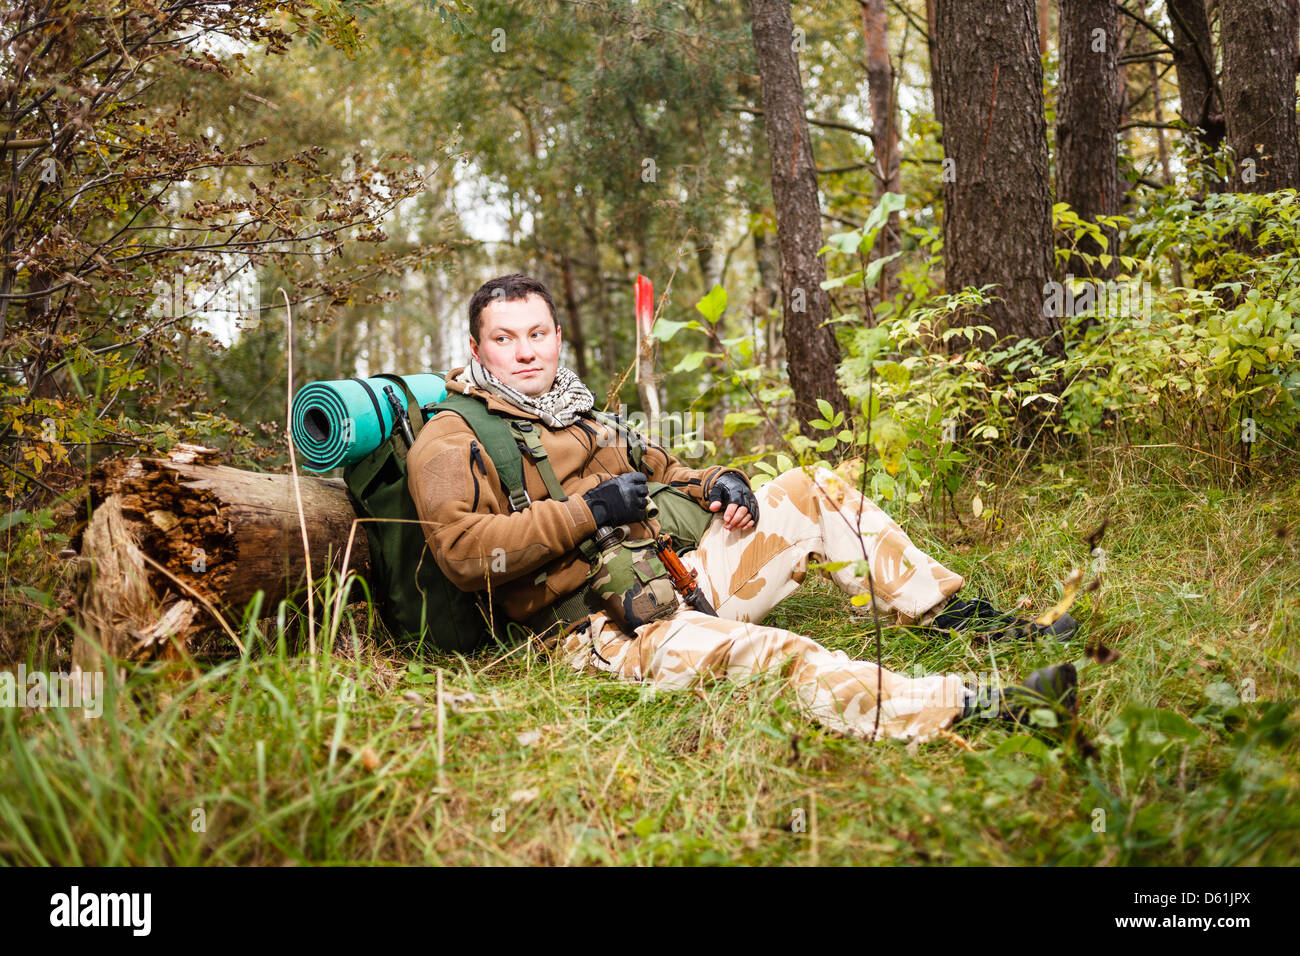 Soldier relaxing in a forest. Stock Photo